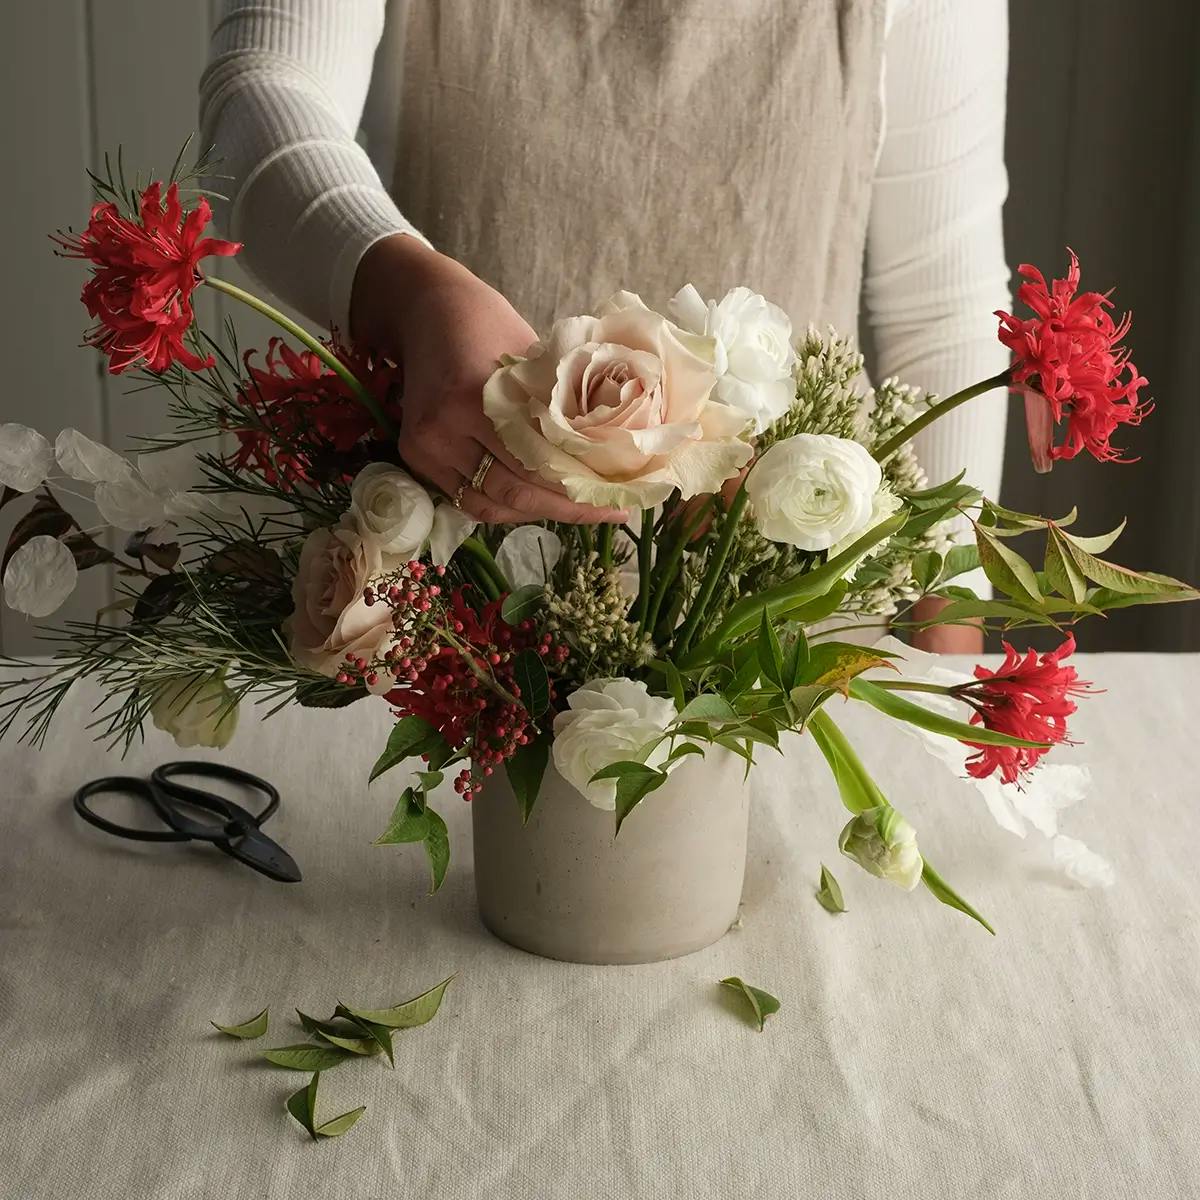 Hands adding flowers to a vase for a Christmas centerpiece.